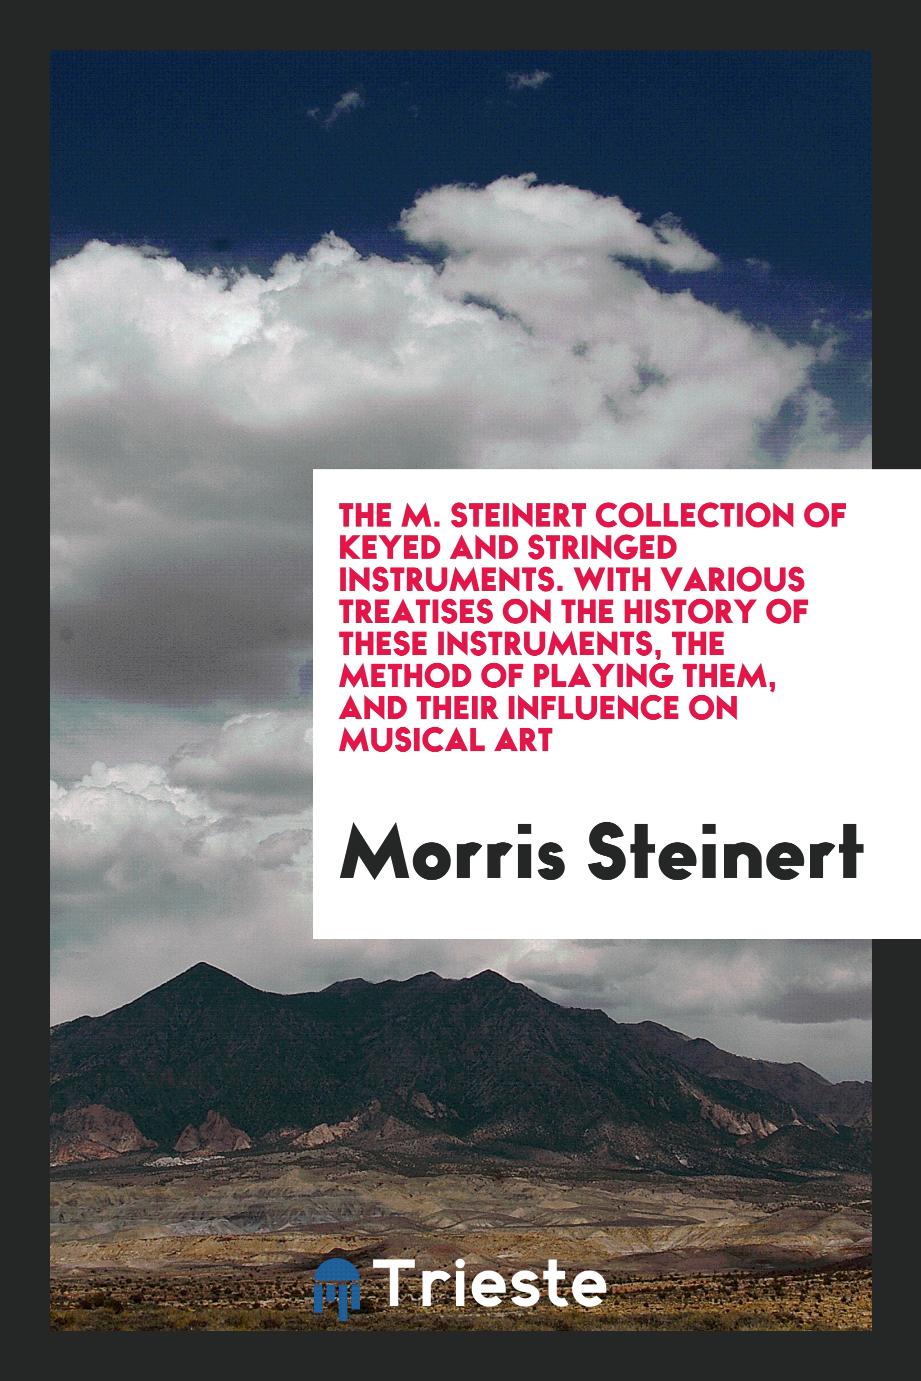 The M. Steinert Collection of Keyed and Stringed Instruments. With Various Treatises on the History of These Instruments, the Method of Playing Them, and Their Influence on Musical Art